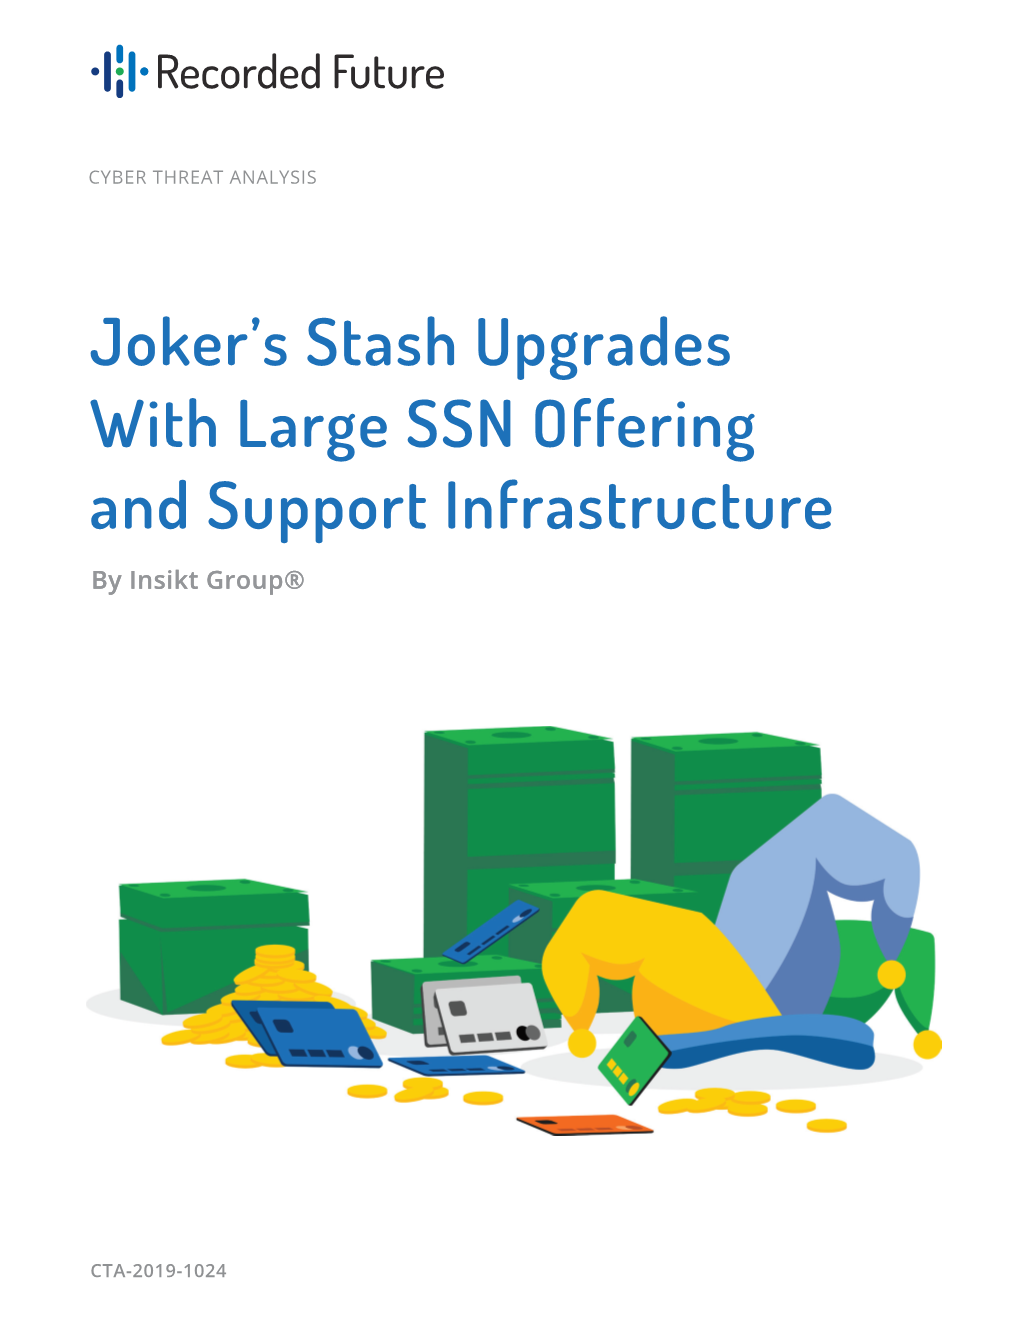 Joker's Stash Upgrades with Large SSN Offering and Support